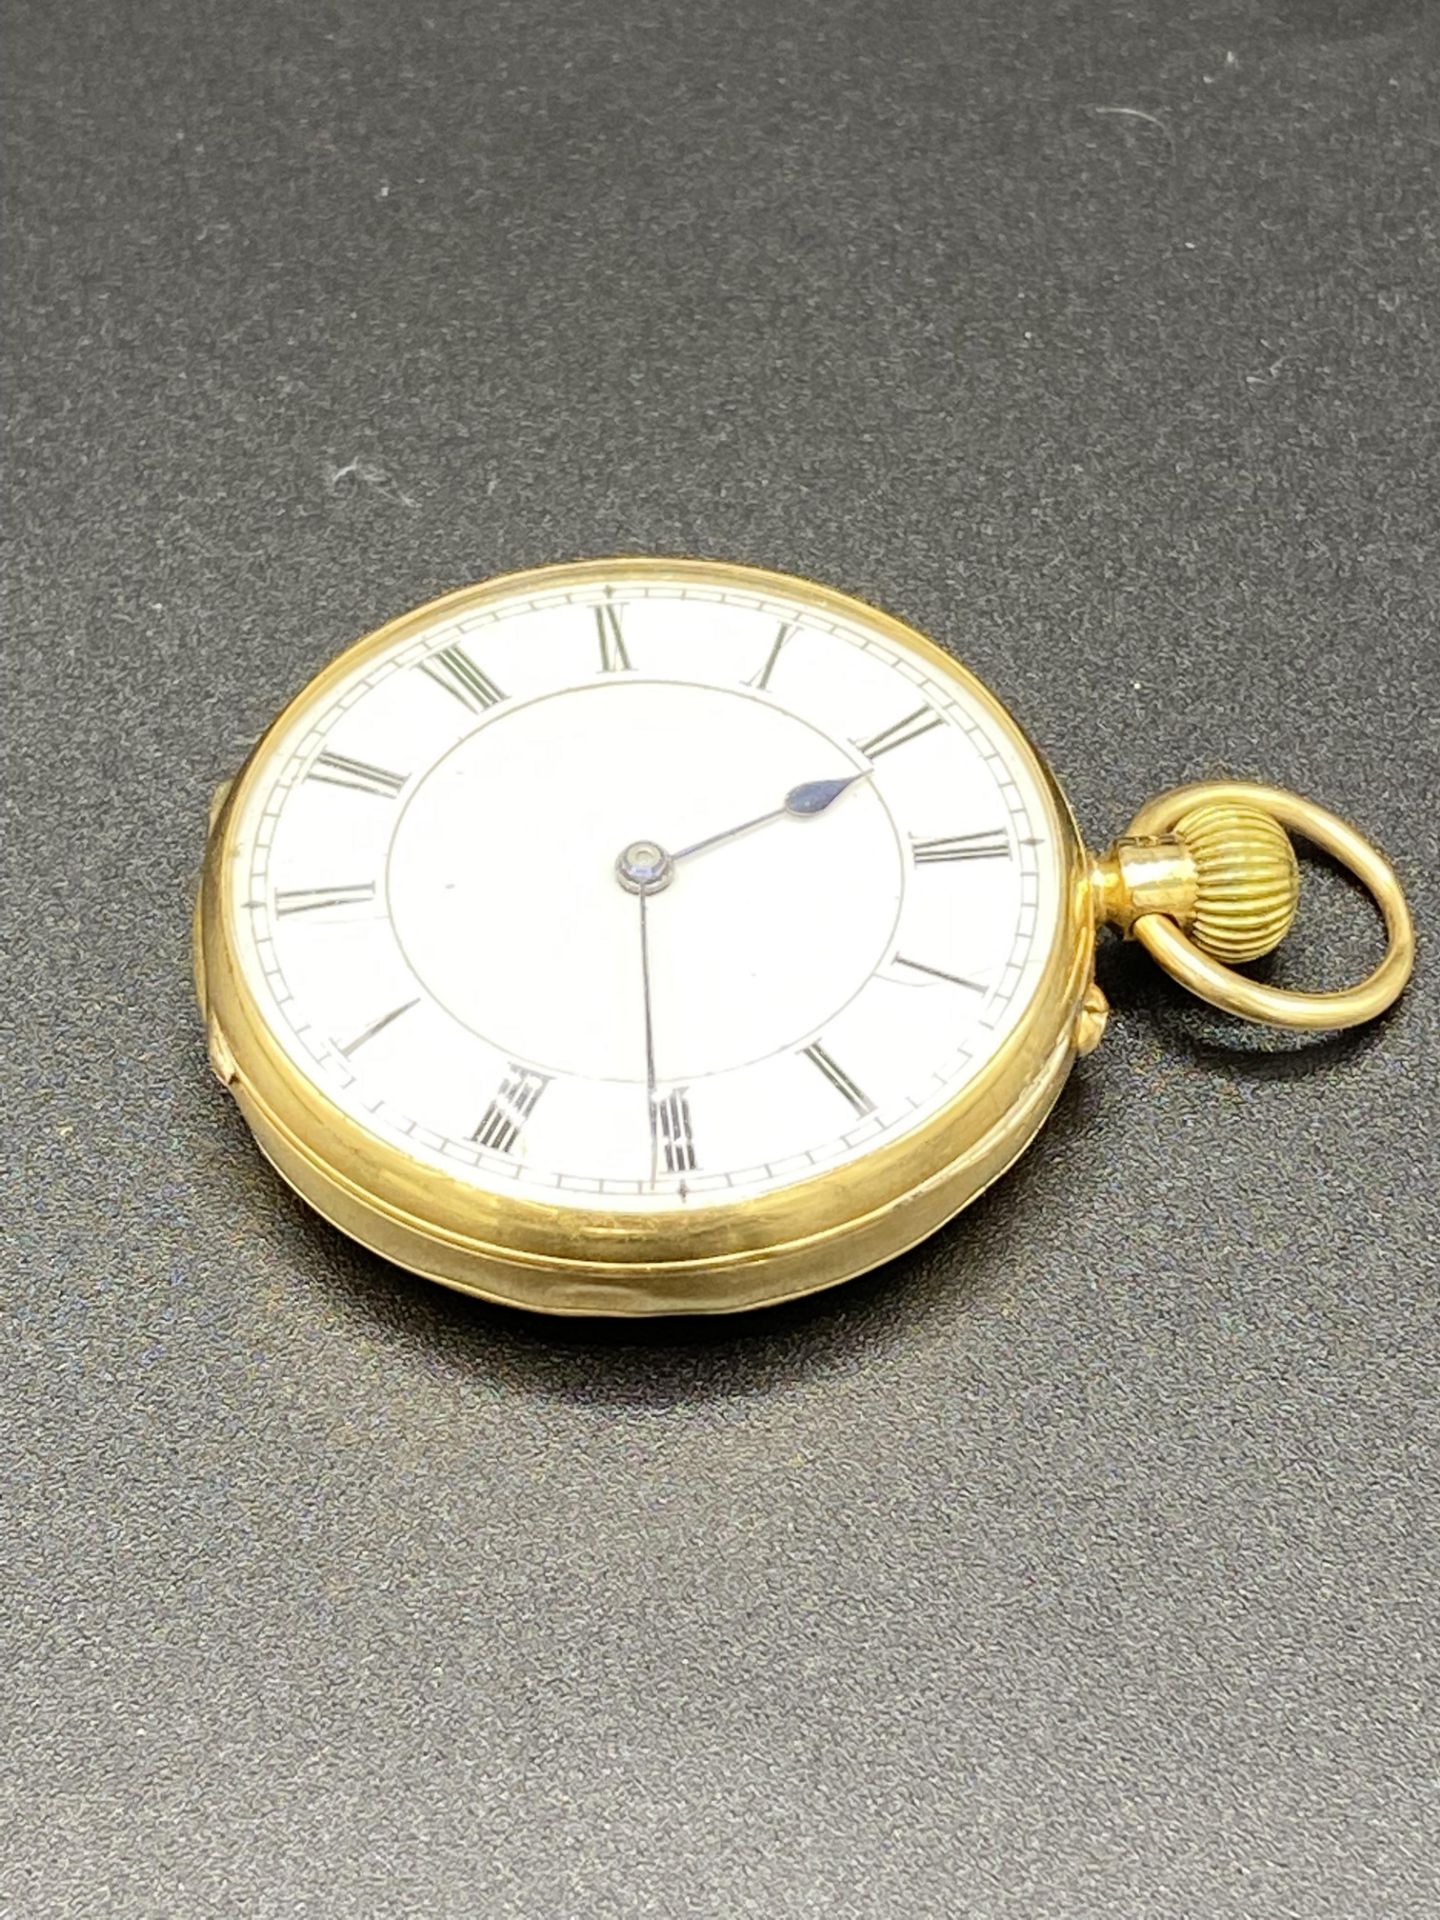 Gold coloured metal pocket watch - Image 2 of 5